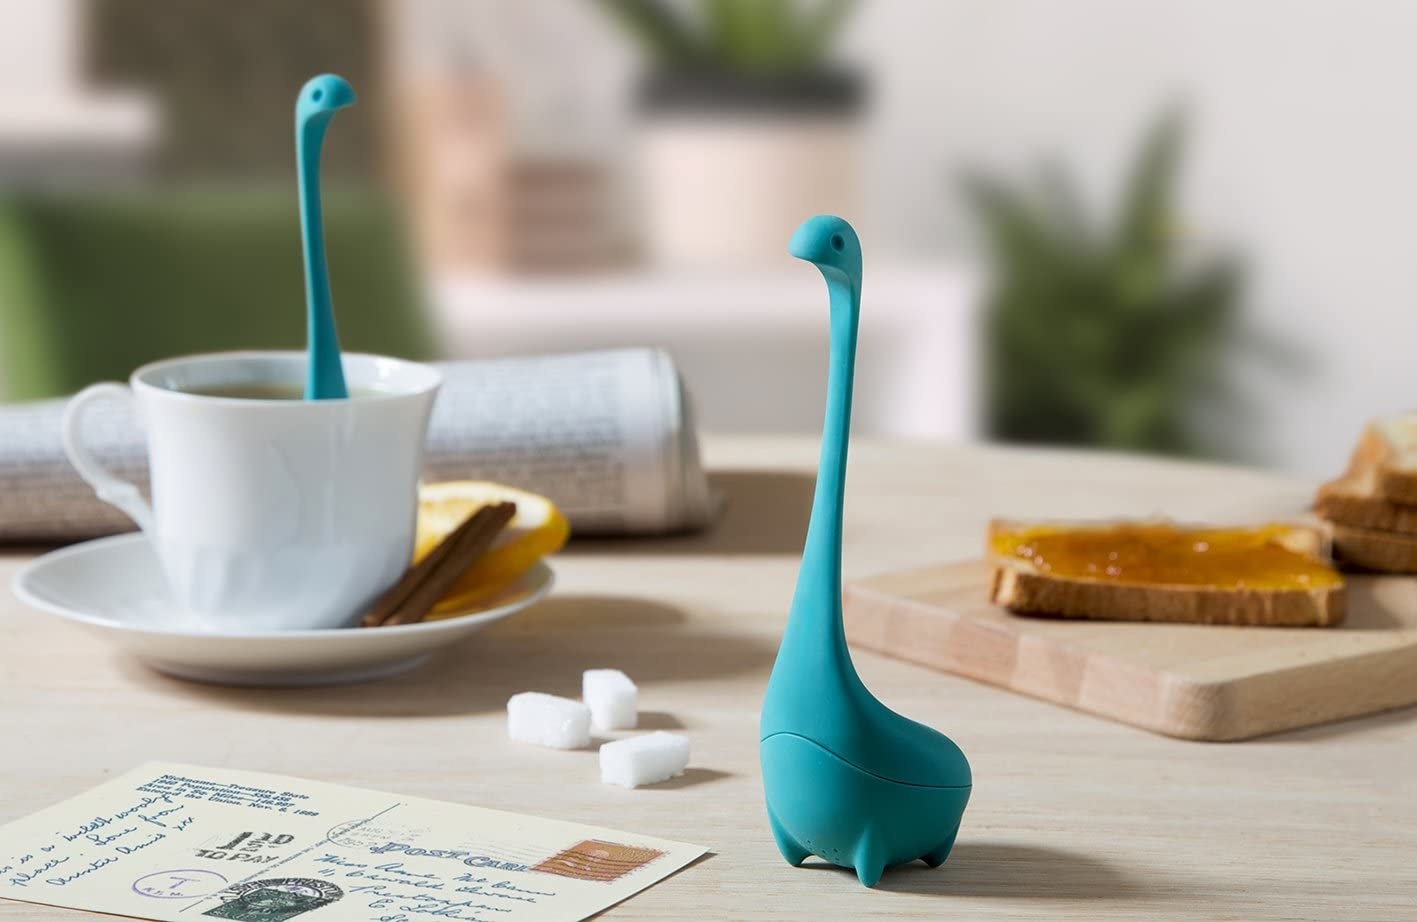 A tea infuser in the shape of a long-neck monster sitting on a table A cup of tea is next to it with another tea infuser inside the cup